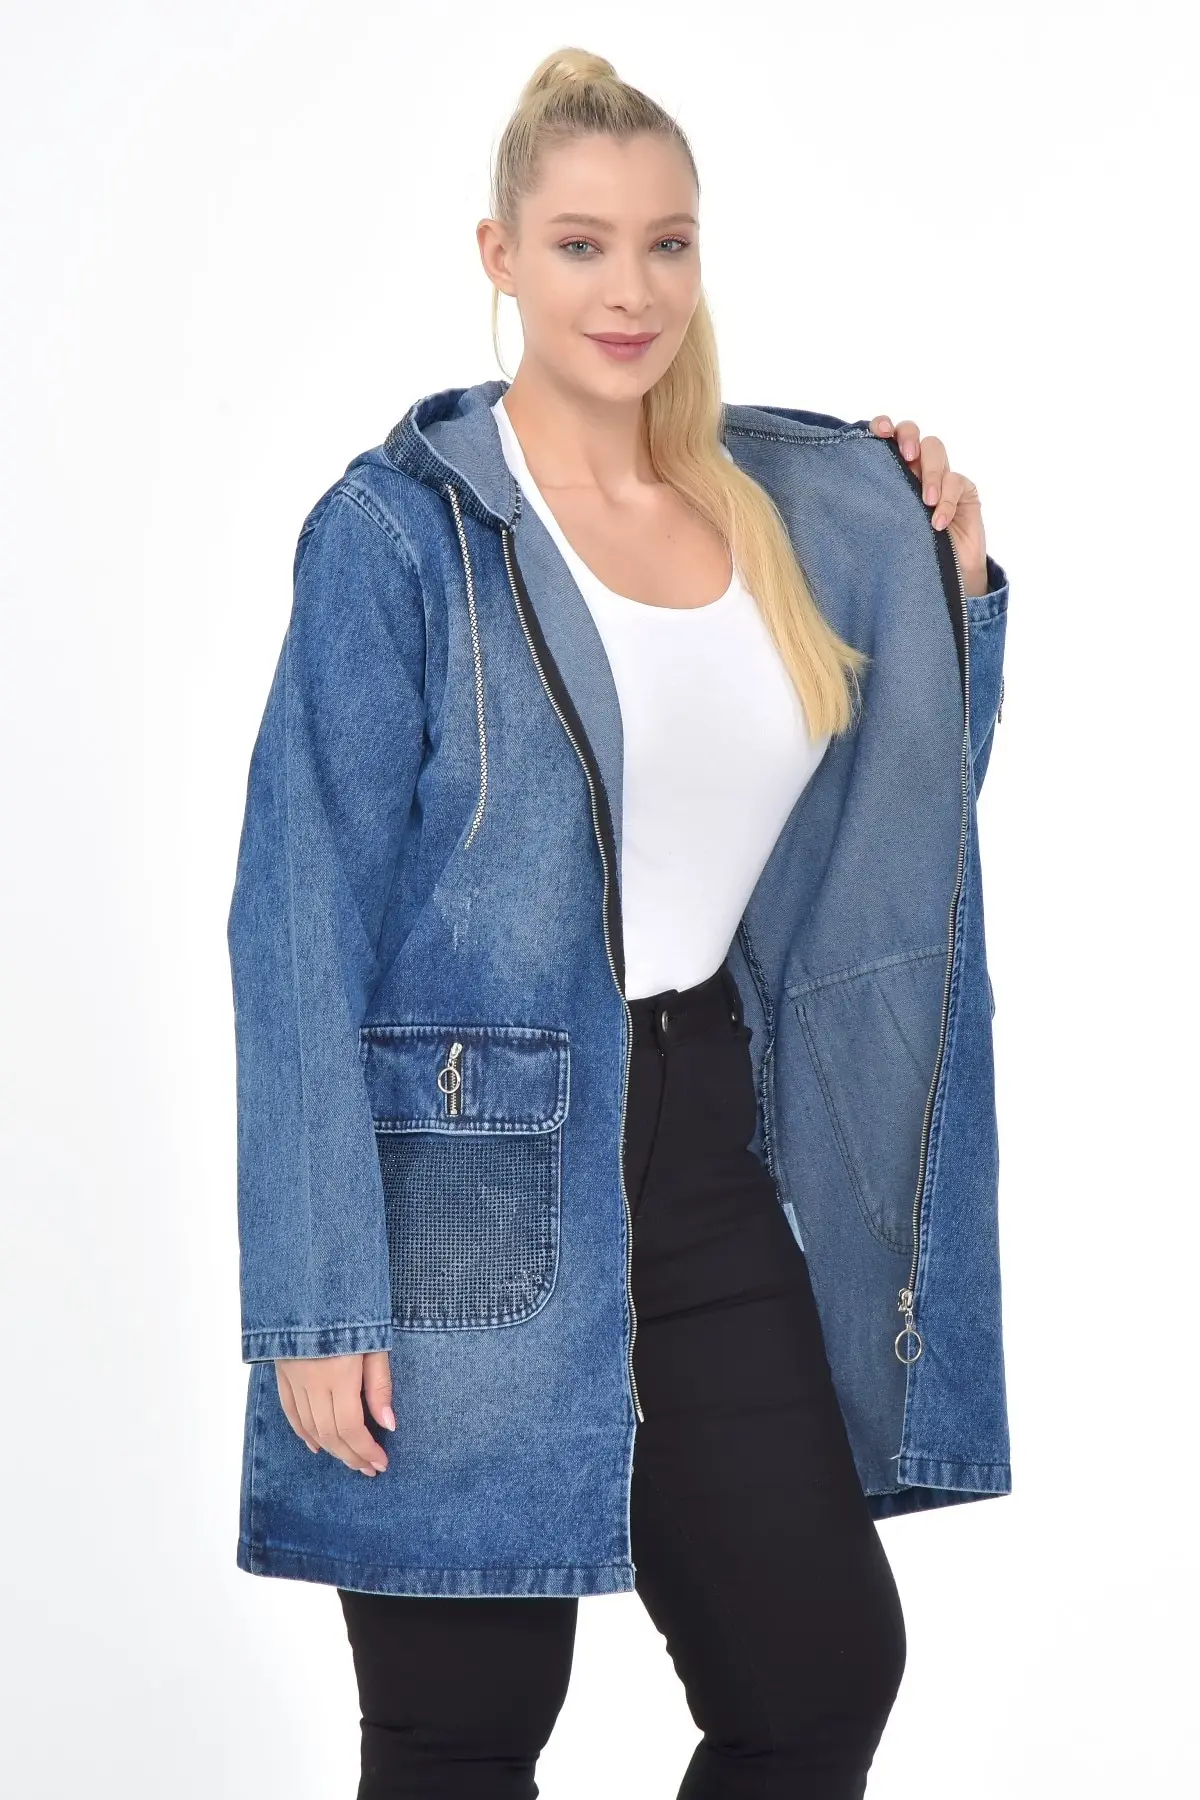 Diaves Plus Size Women Autumn Winter Casual Thick Denim Jacket Loose Hooded Warm Jean Coat Outerwear Turkish Quality